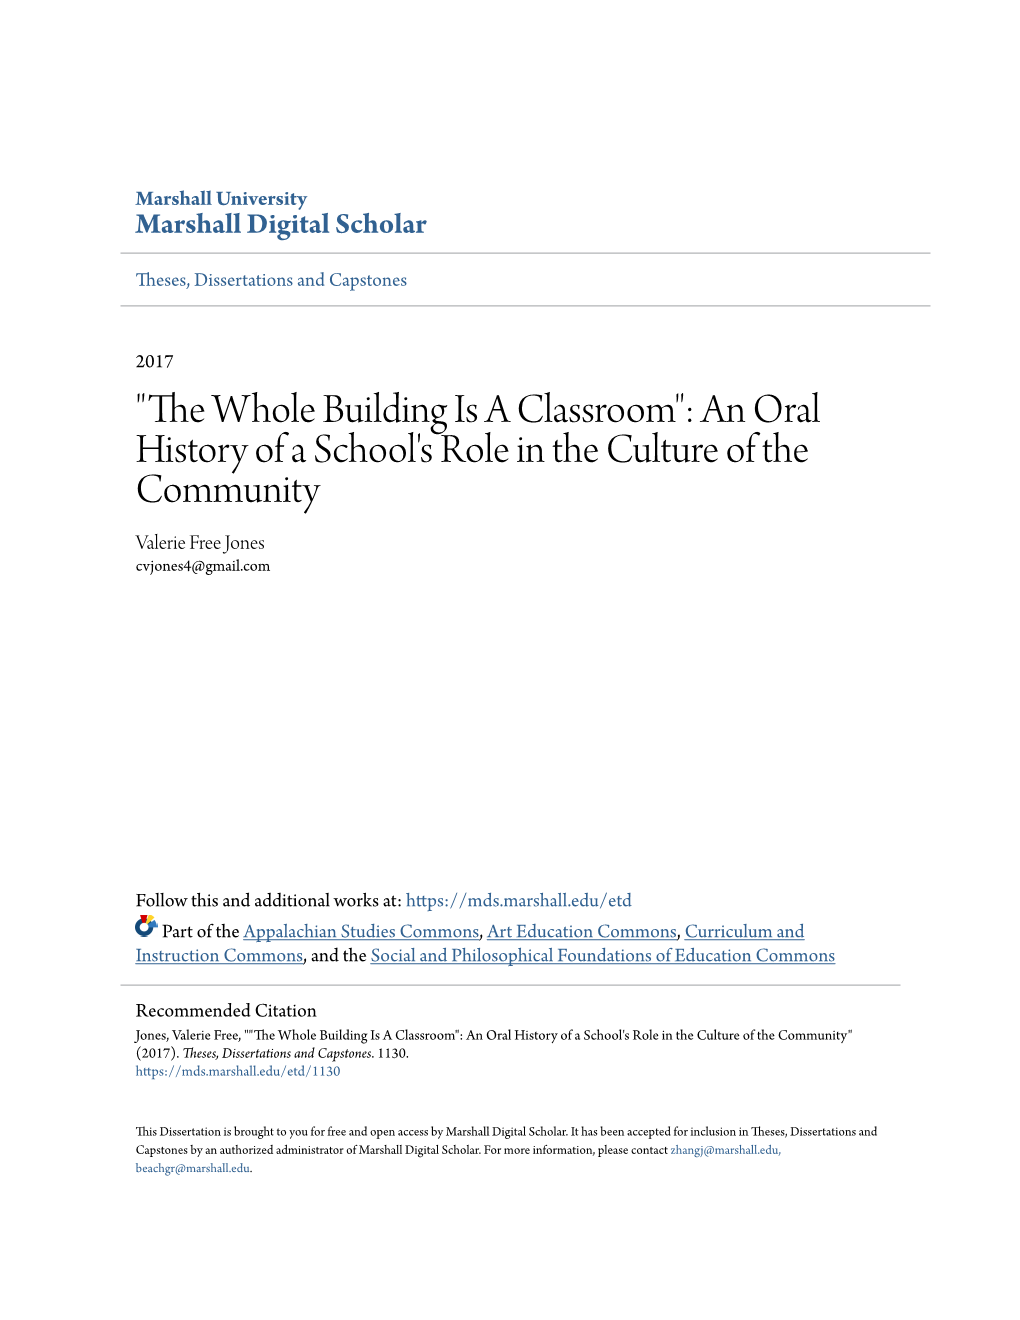 "The Whole Building Is a Classroom": an Oral History of a School's Role in the Culture of the Community Valerie Free Jones Cvjones4@Gmail.Com